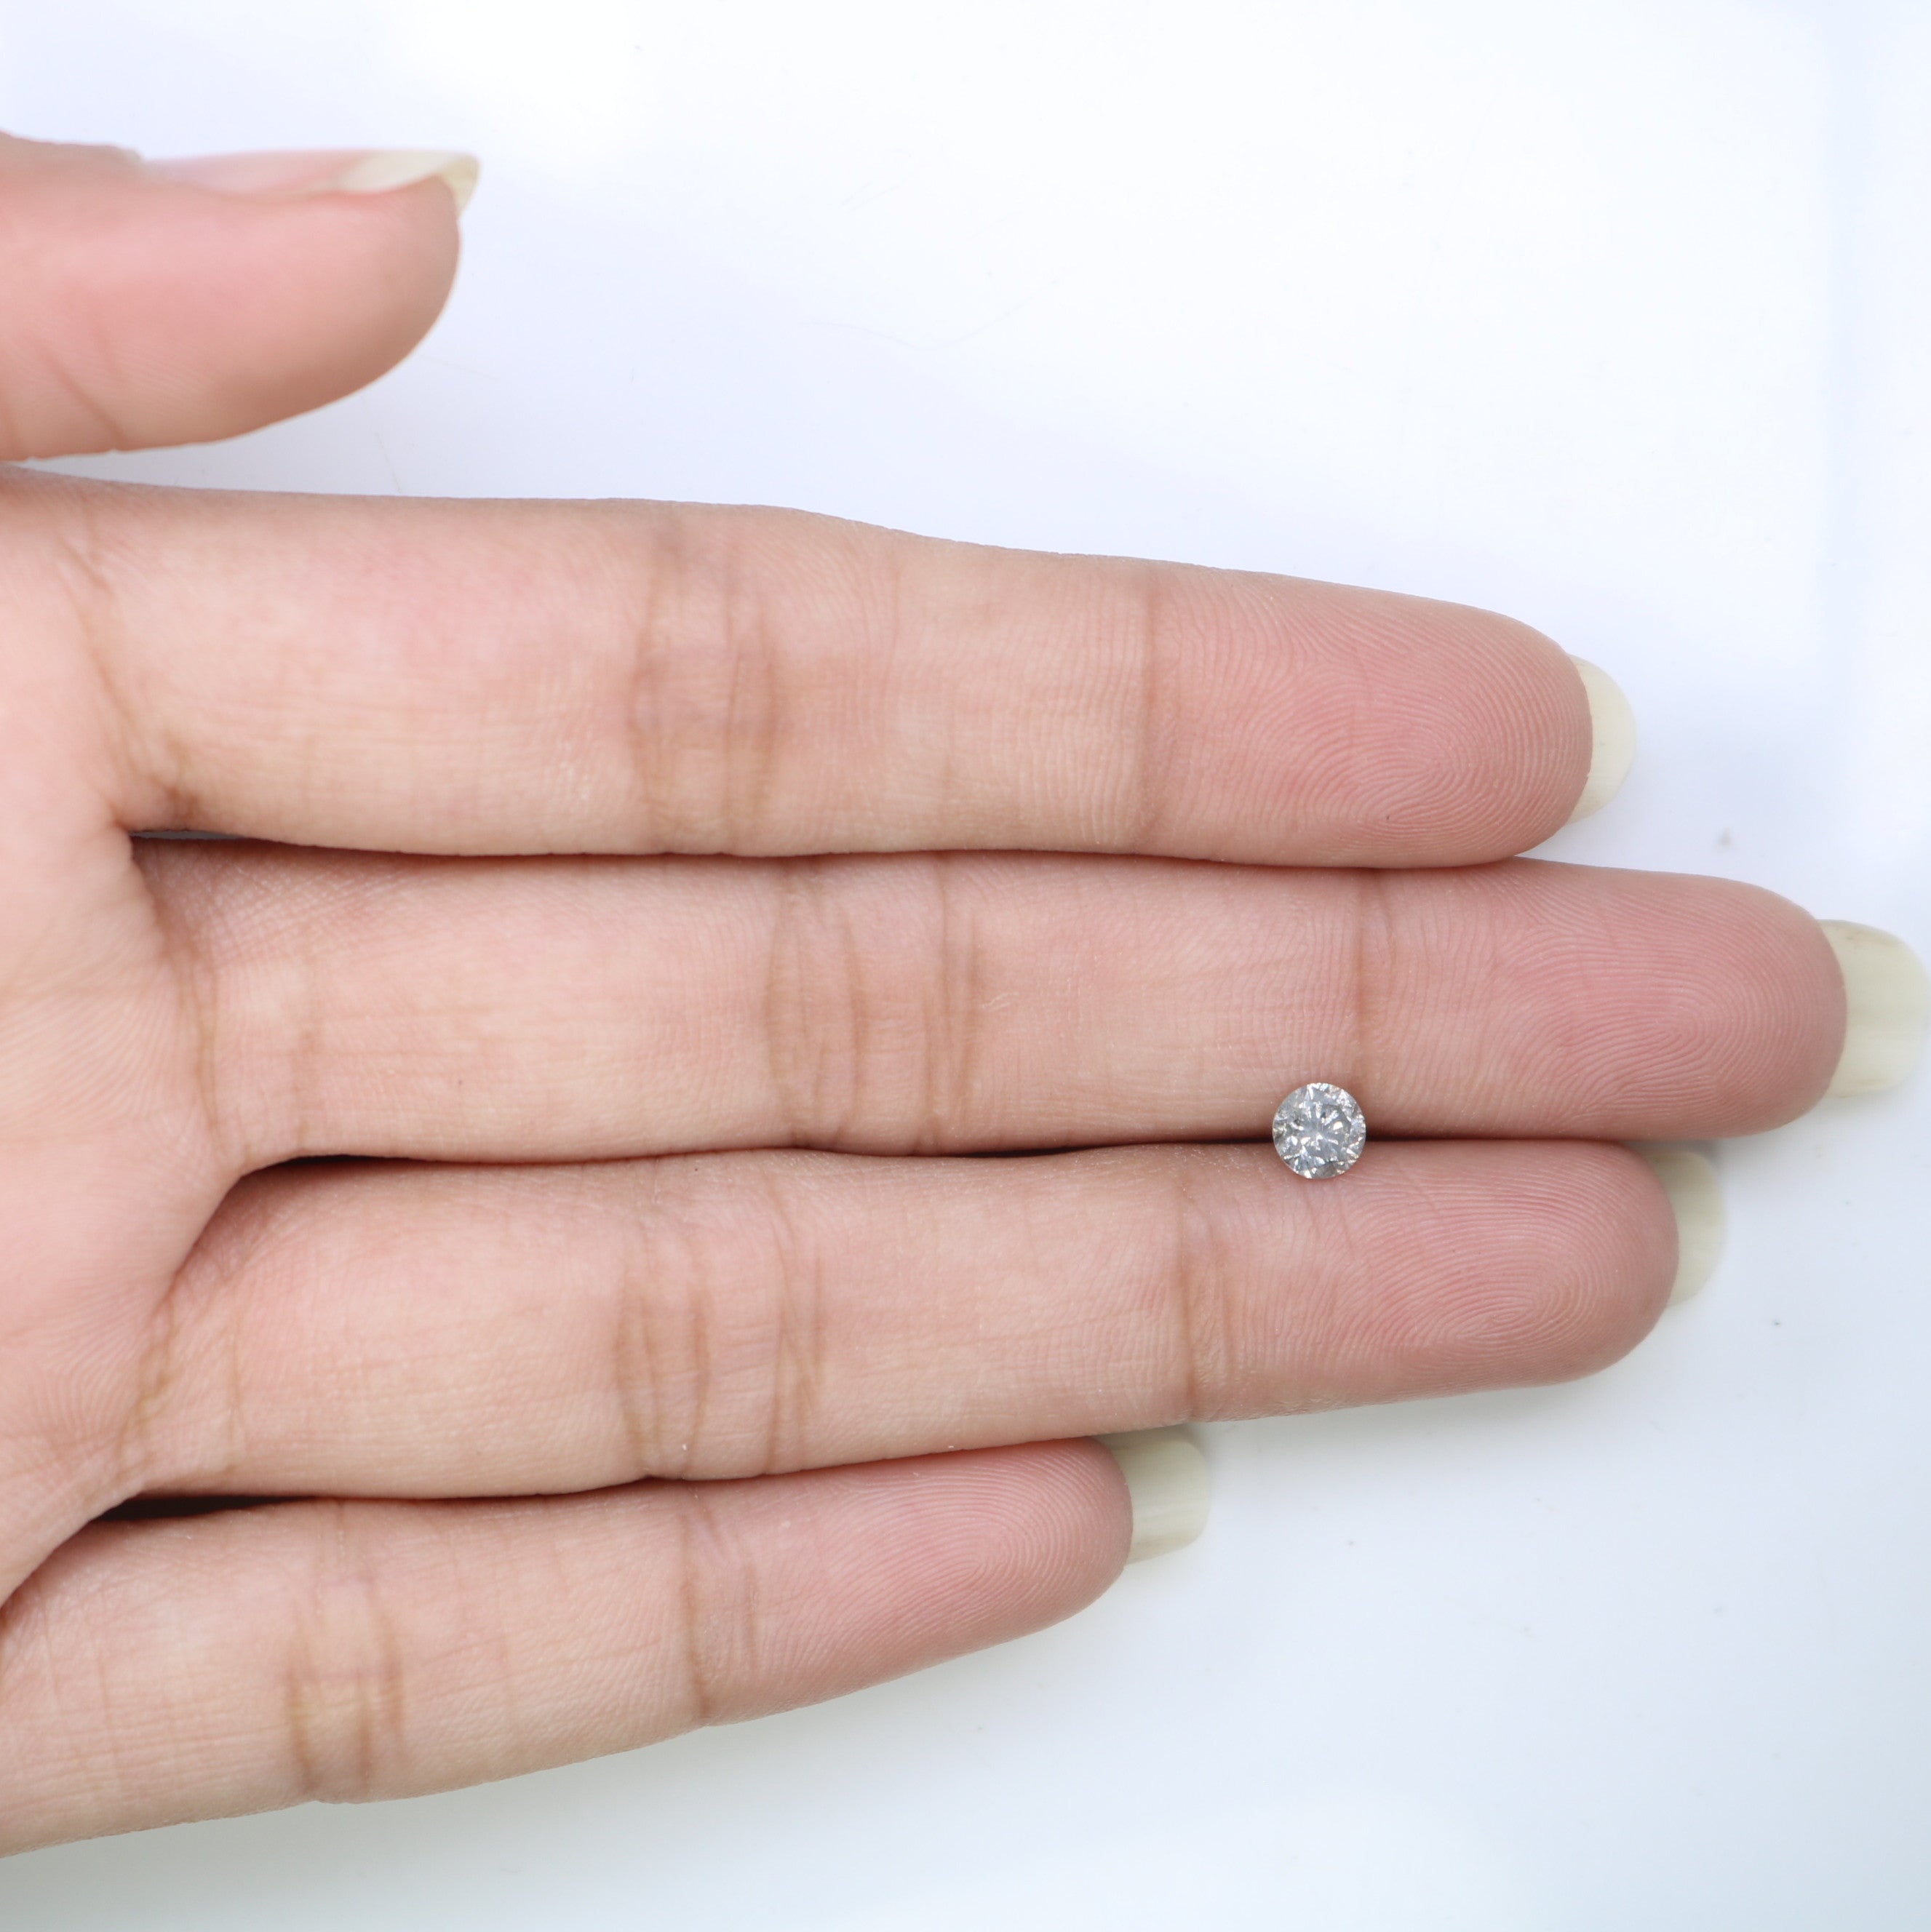 0.40 CT  Salt And Pepper Round Brilliant Cut Loose Diamond For Engagement Ring